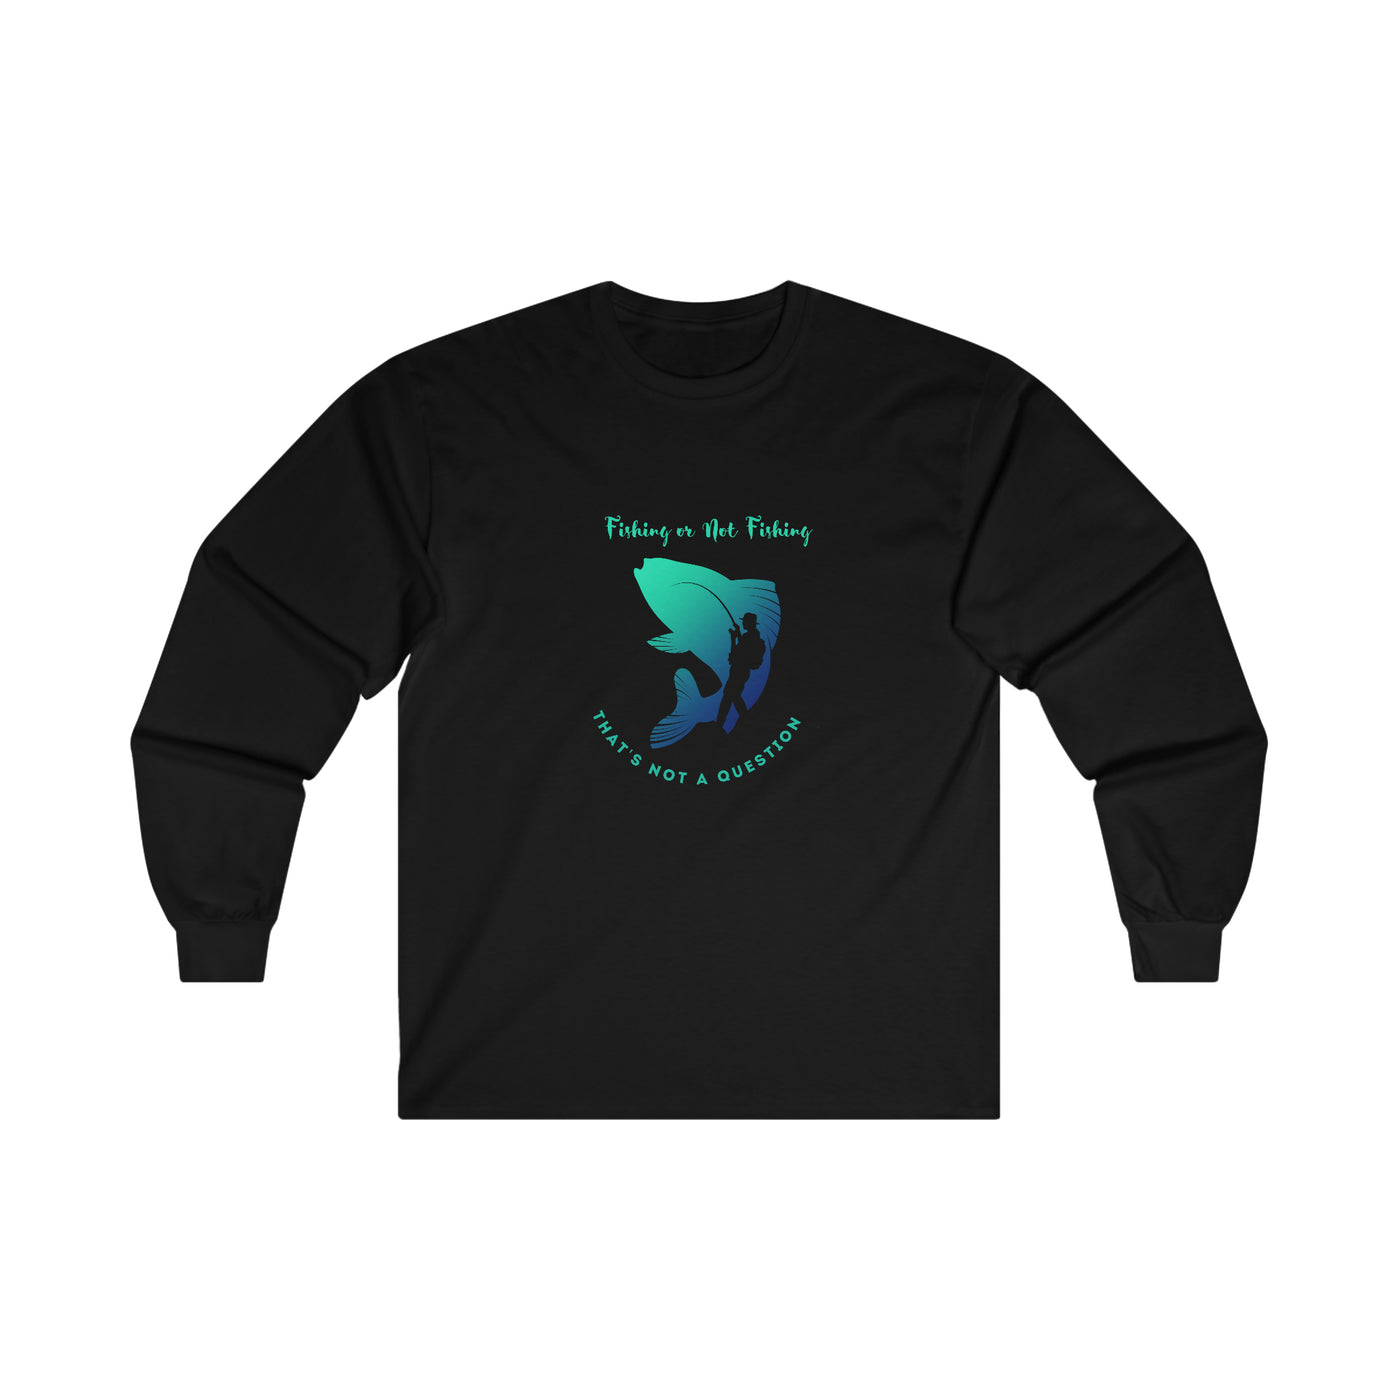 fishing or not fishing is not a question Ultra Cotton Long Sleeve Tee